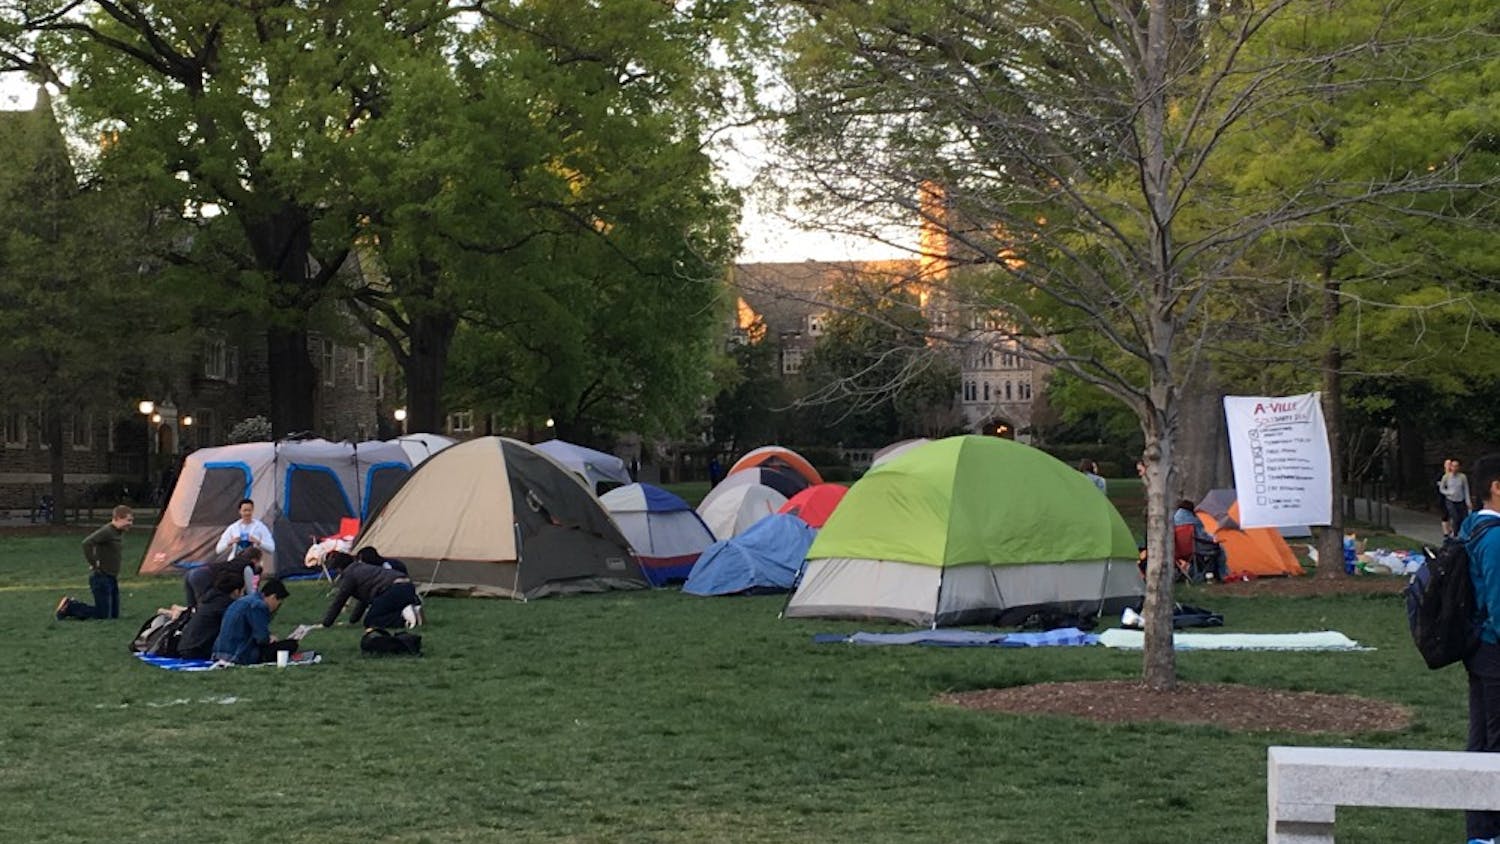  Protestors encamped on Abele Quad eat dinner before the sun sets over Duke University on Monday evening. Volunteer faculty and organizations such as the Duke Center for Multicultural Affairs donated seventeen tents, food and other supplies to the protesters.